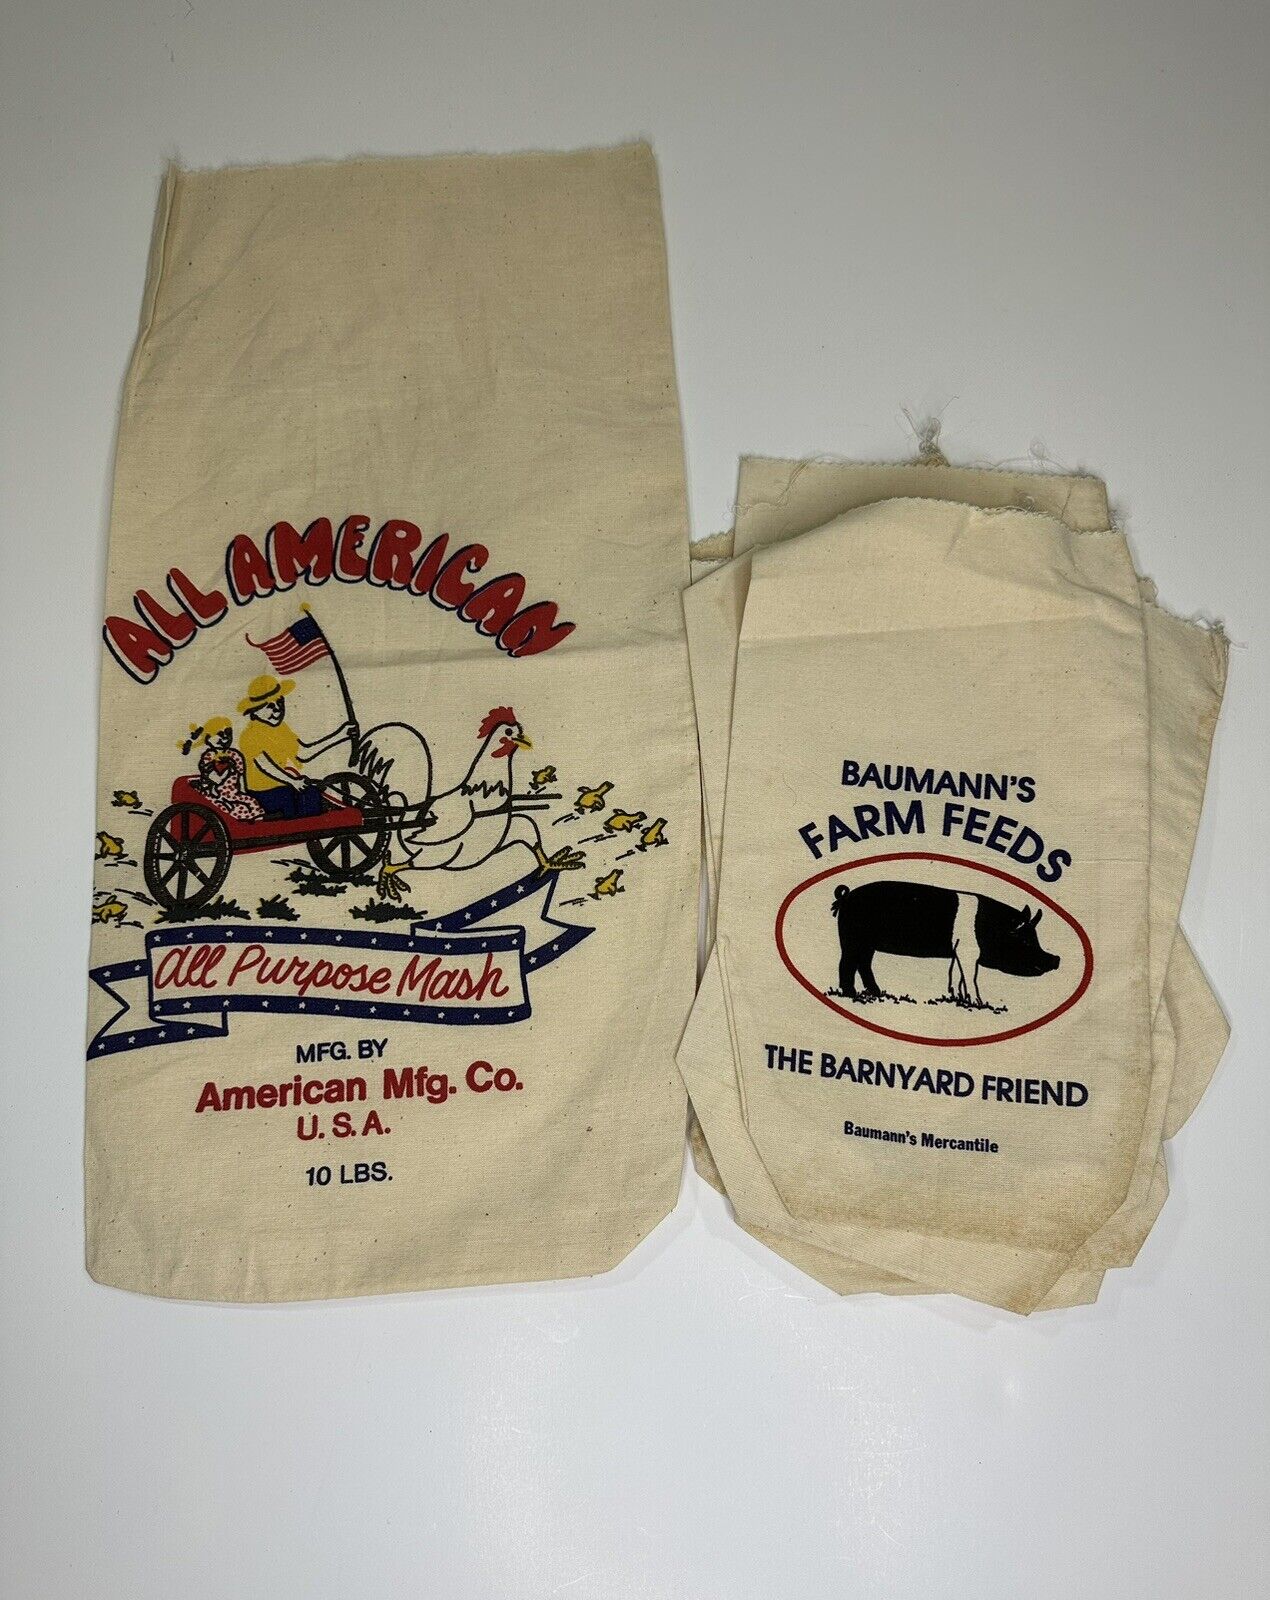 Lot of vintage all purpose mash farm bags Made in USA. one 10 LBS & 8 small bags